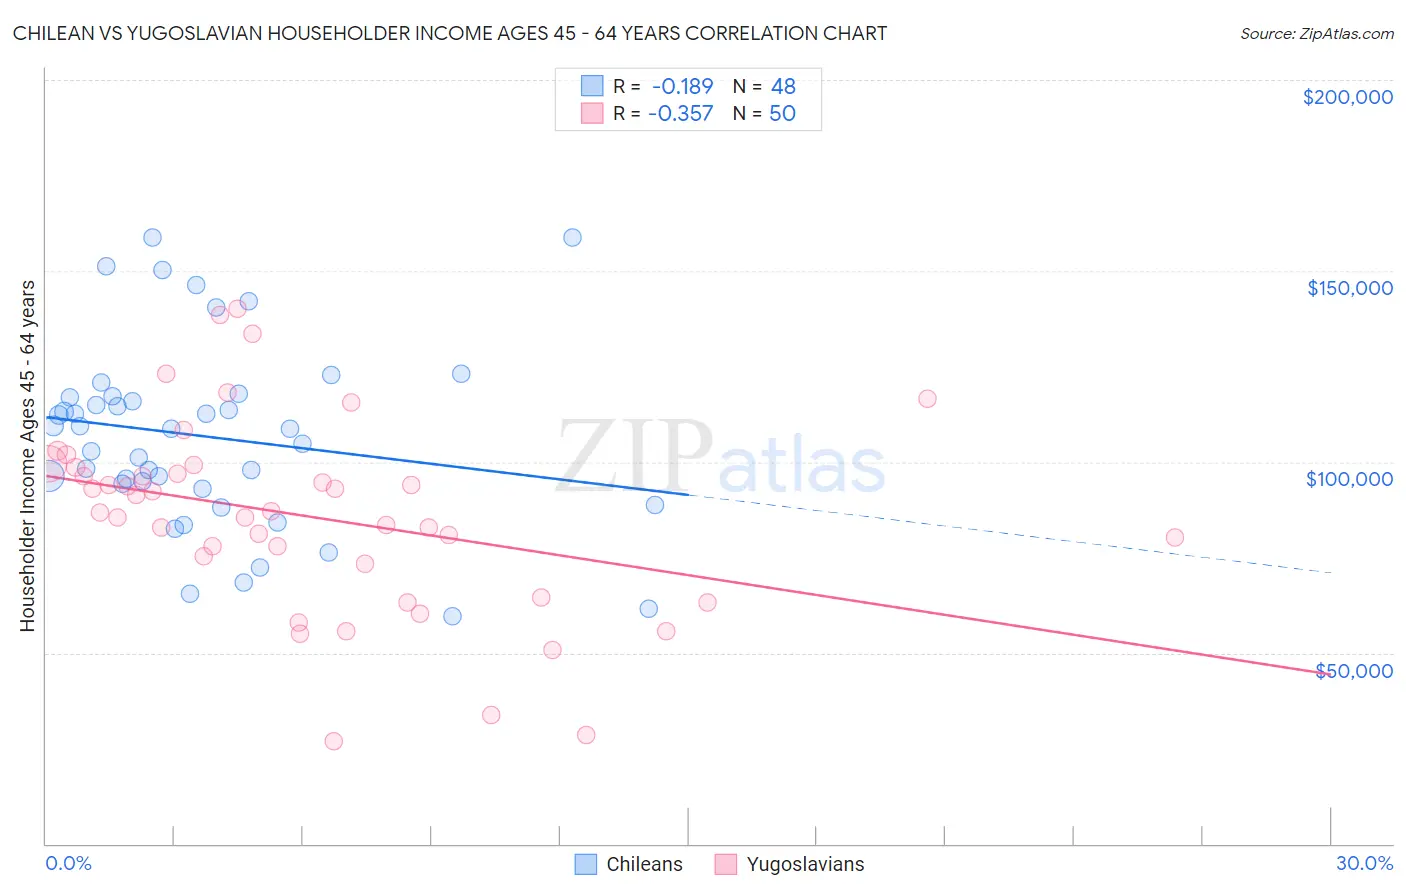 Chilean vs Yugoslavian Householder Income Ages 45 - 64 years